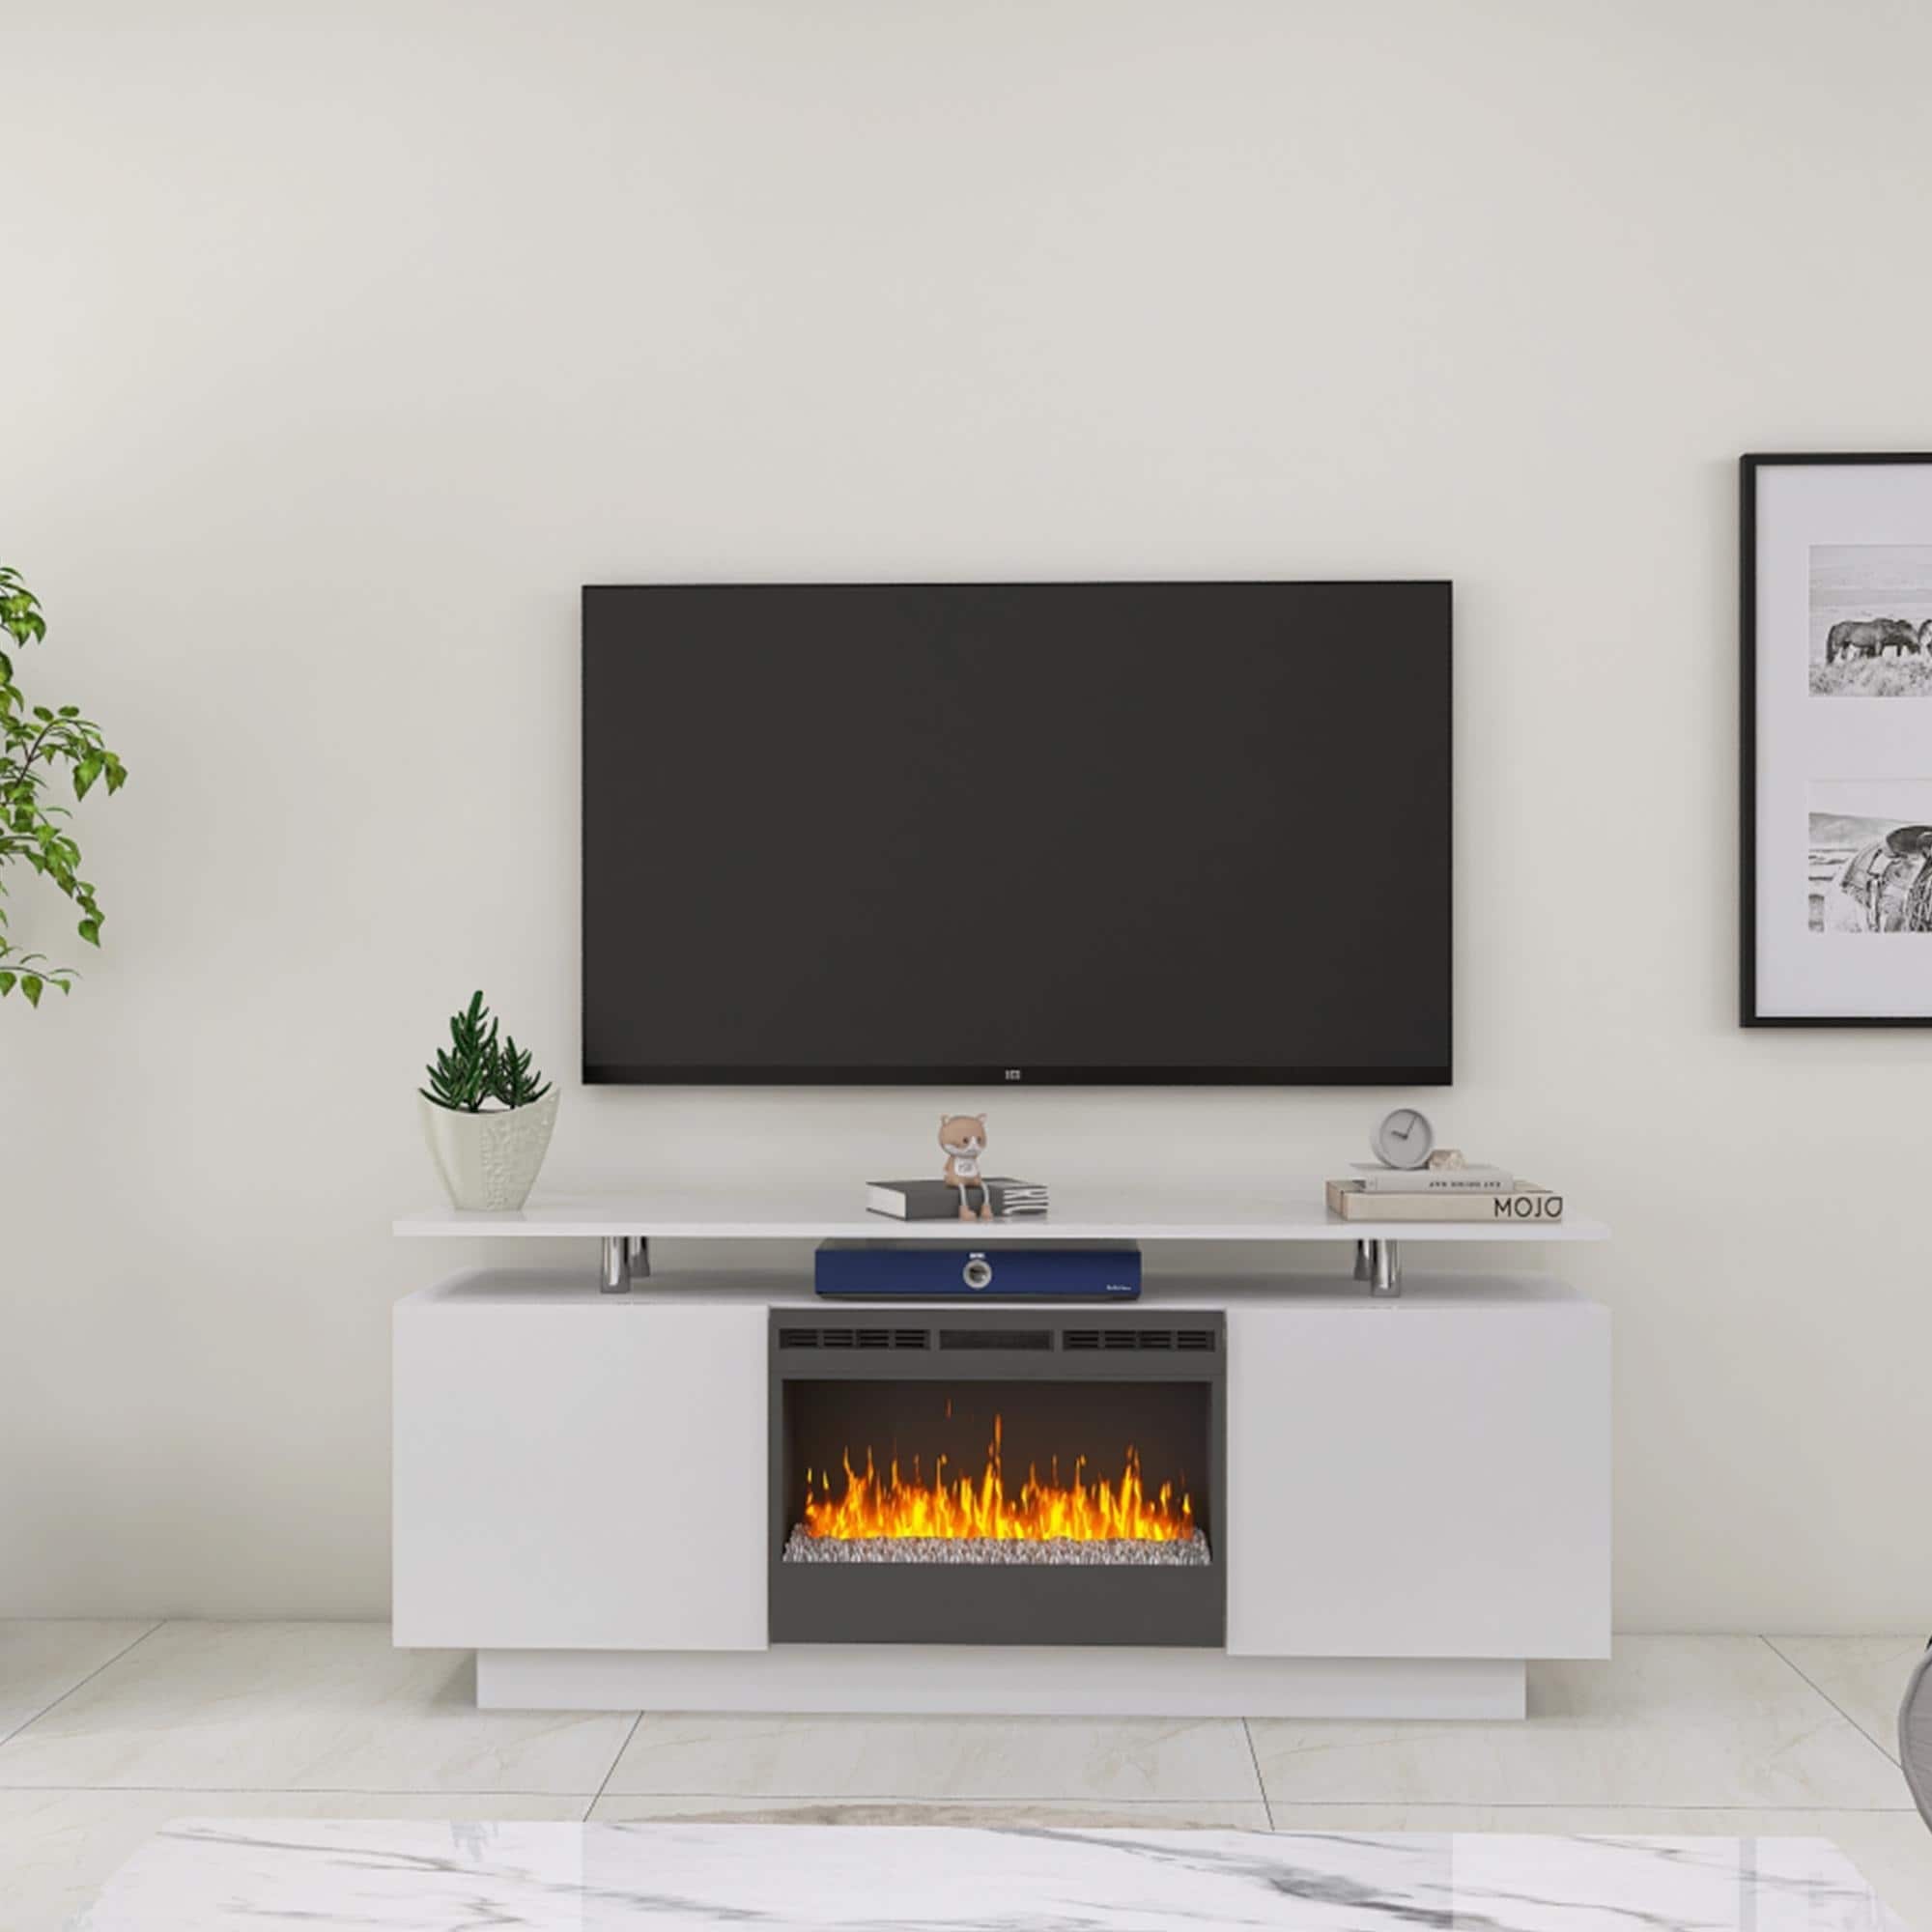 GEROJO High Gloss White Tempered Glass 70-inch TV Stand with Fireplace, Tiered Storage, 9 Color Flames, Over-heating Protection